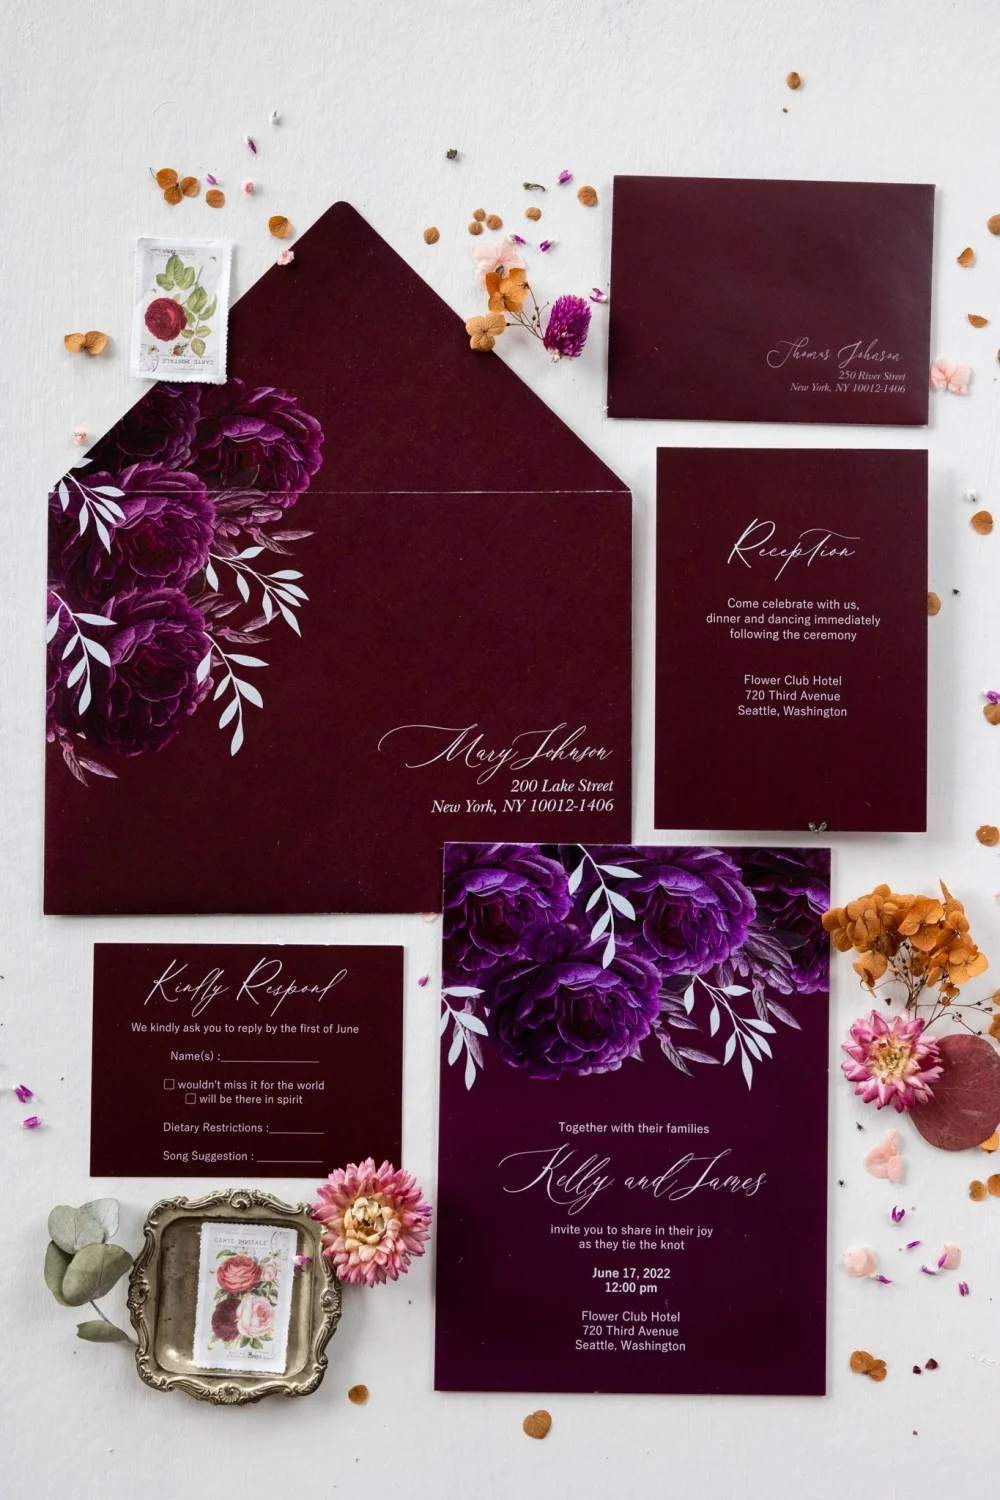 Elegant Glass or Acrylic Wedding Invitations with Burgundy Peonies and Marsala Accents - GL16